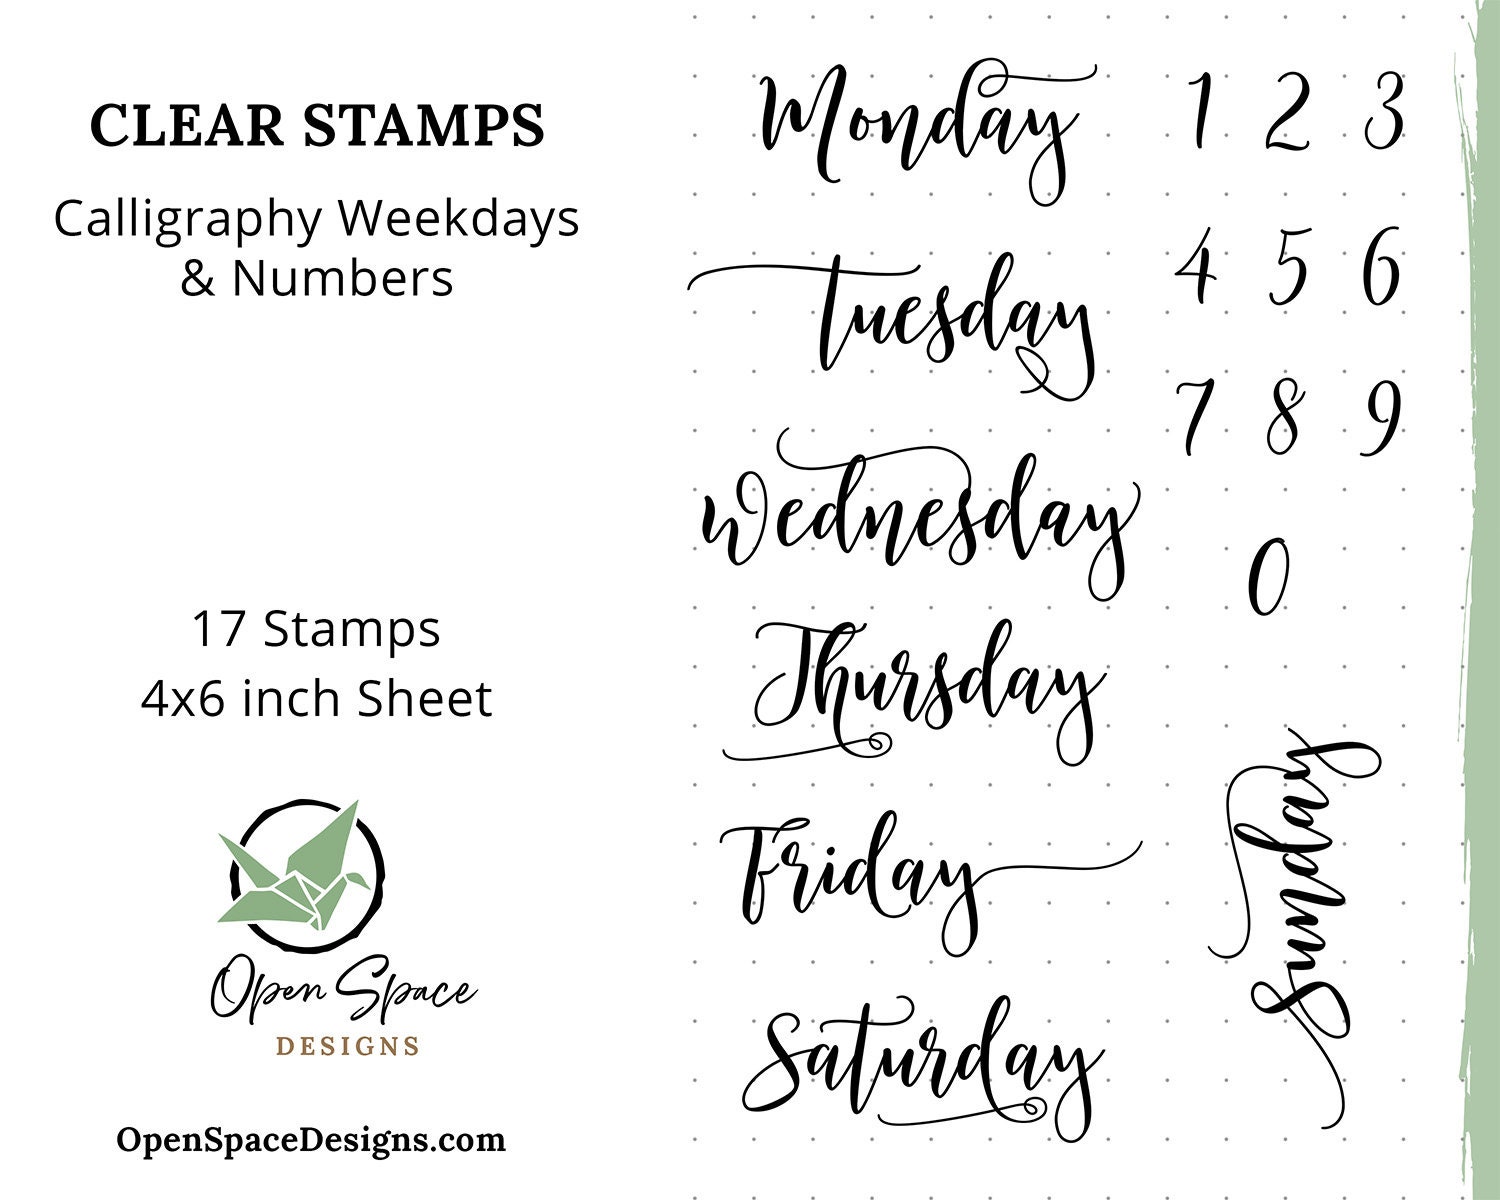 Tuesday Journal Stamp - Simply Stamps